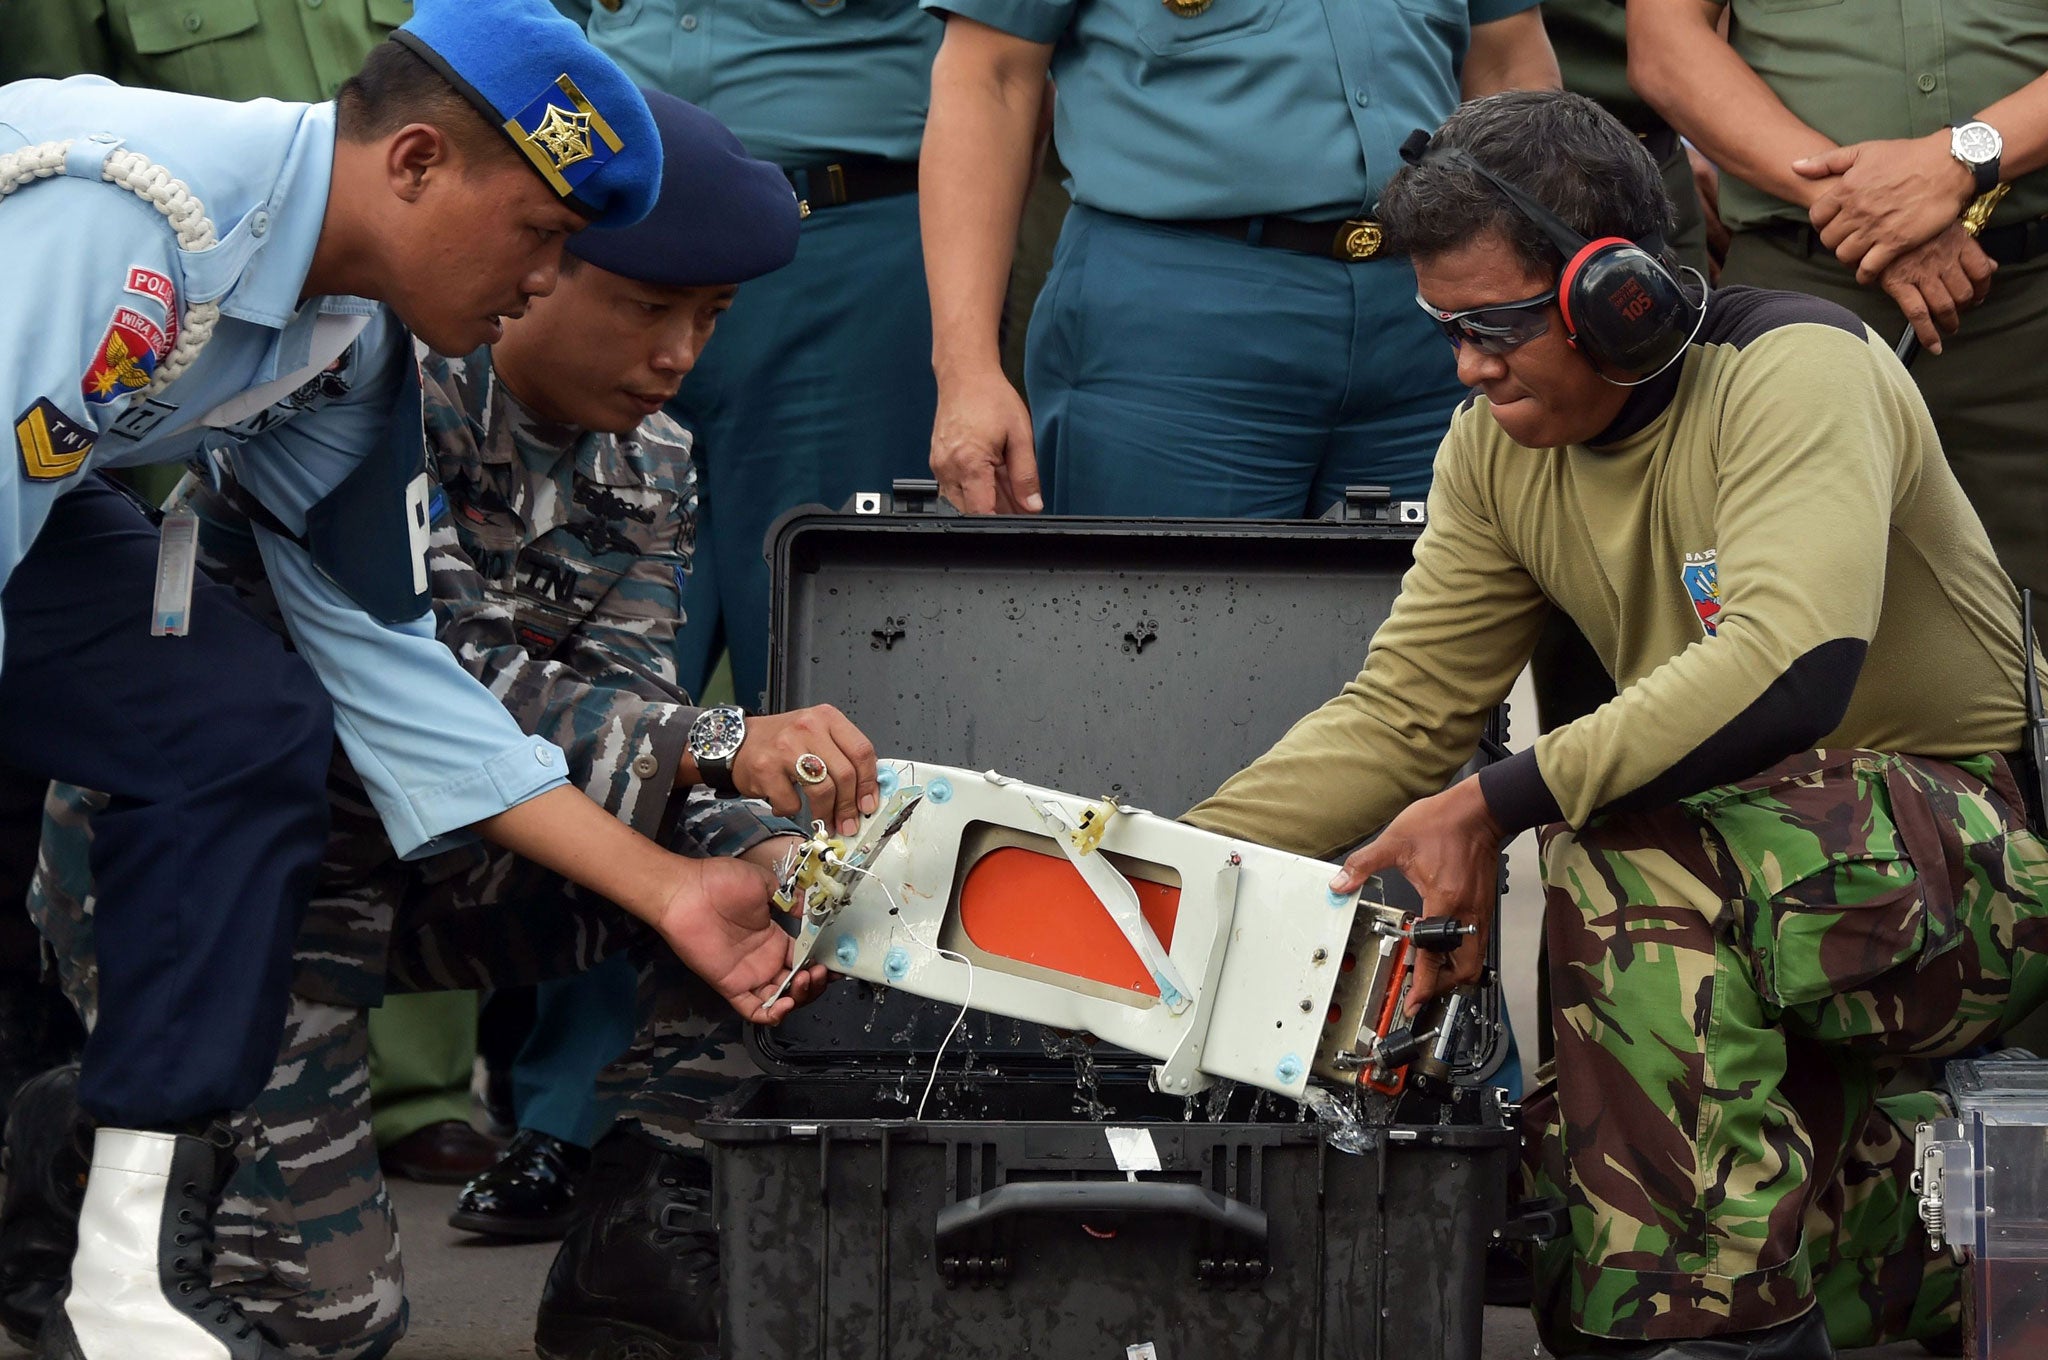 The flight data recorder of AirAsia QZ8501 is lifted out of a carrying case at the airbase in Pangkalan Bun, Central Kalimantan